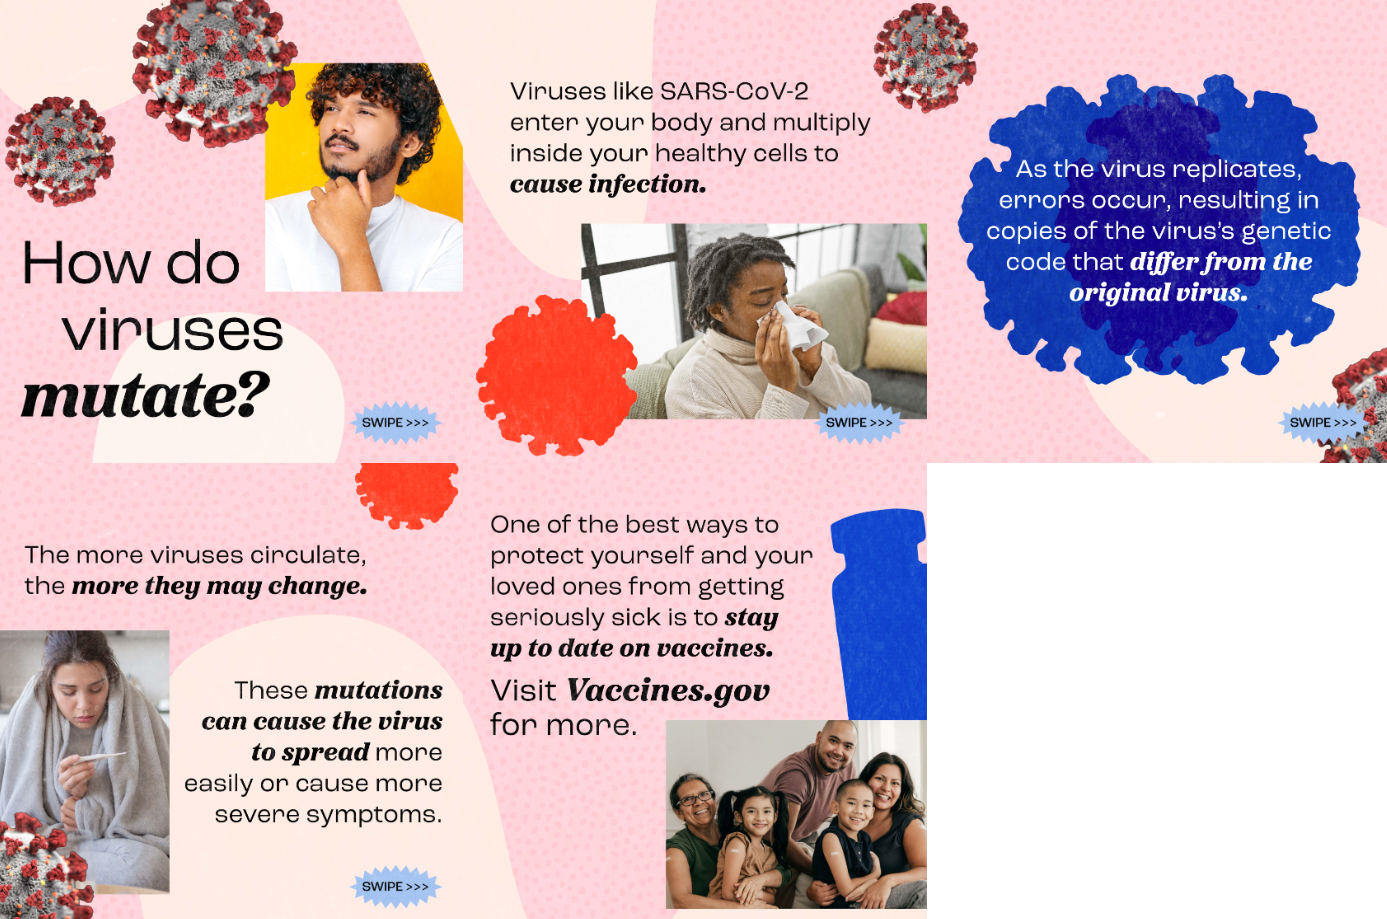 Graphics show a man of color pensively stroking his chin, a Black person blowing their nose on a couch, a person huddled under a blanket reading a thermometer, and a grandmother, mother, father & two children smiling and showing off the bandages on their shoulders post-vaccination.